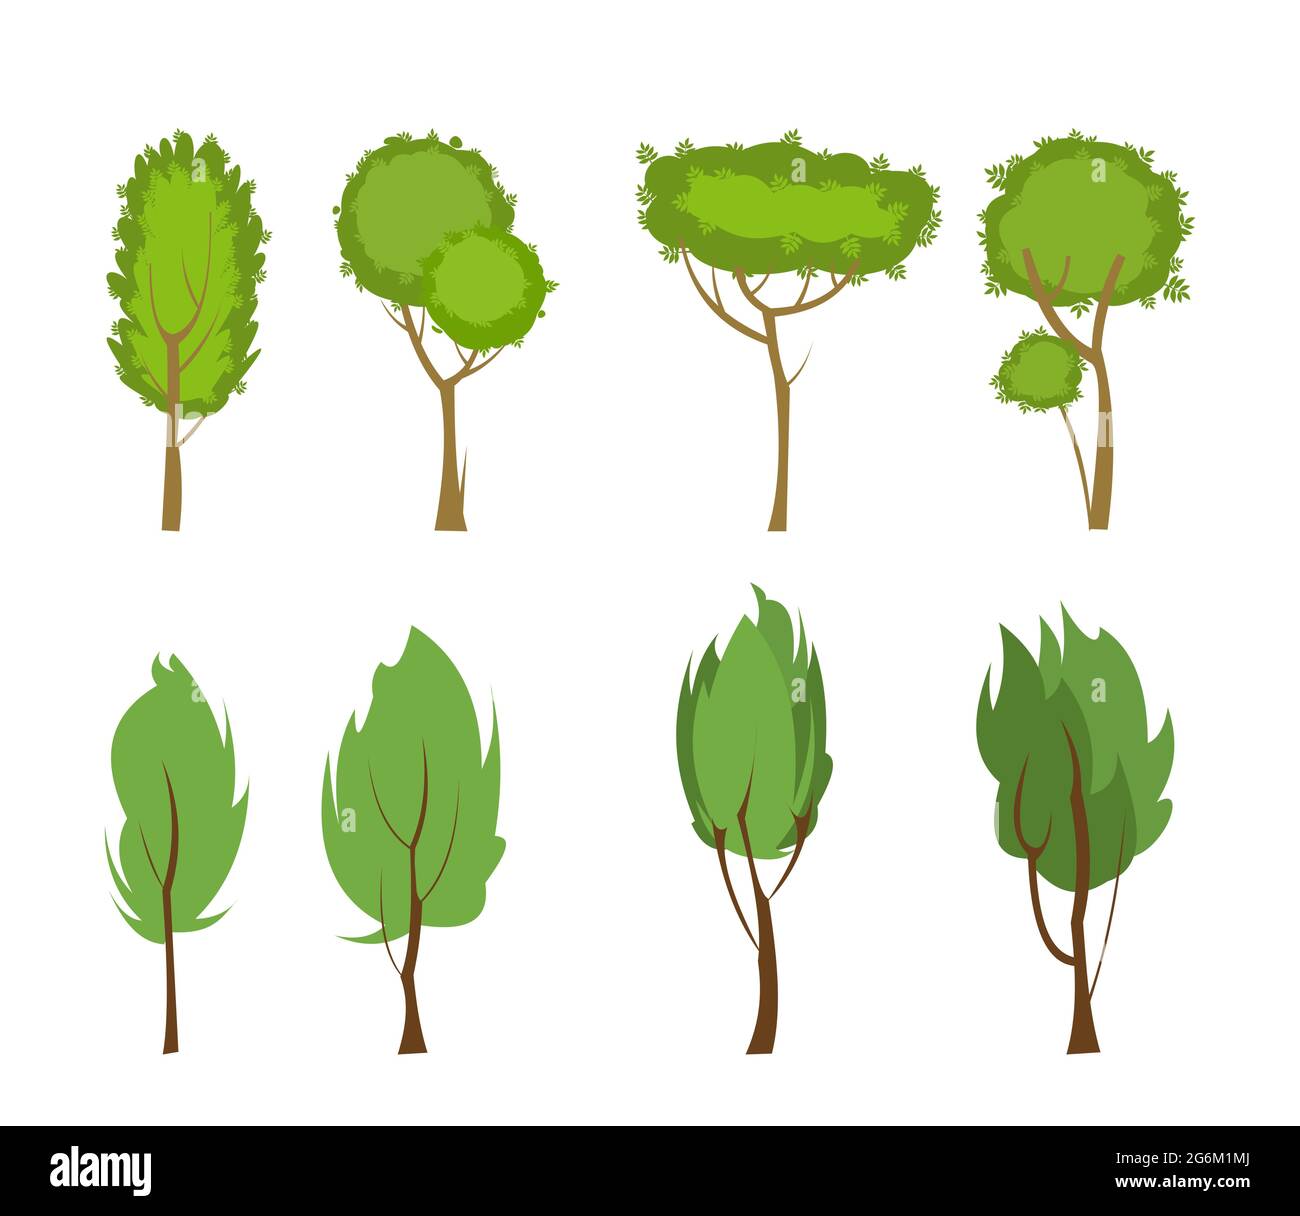 Set of trees. Adult and young green plants. Objects are isolated on a white background. Beautiful thin and graceful. Flat style. Cartoon design Stock Vector